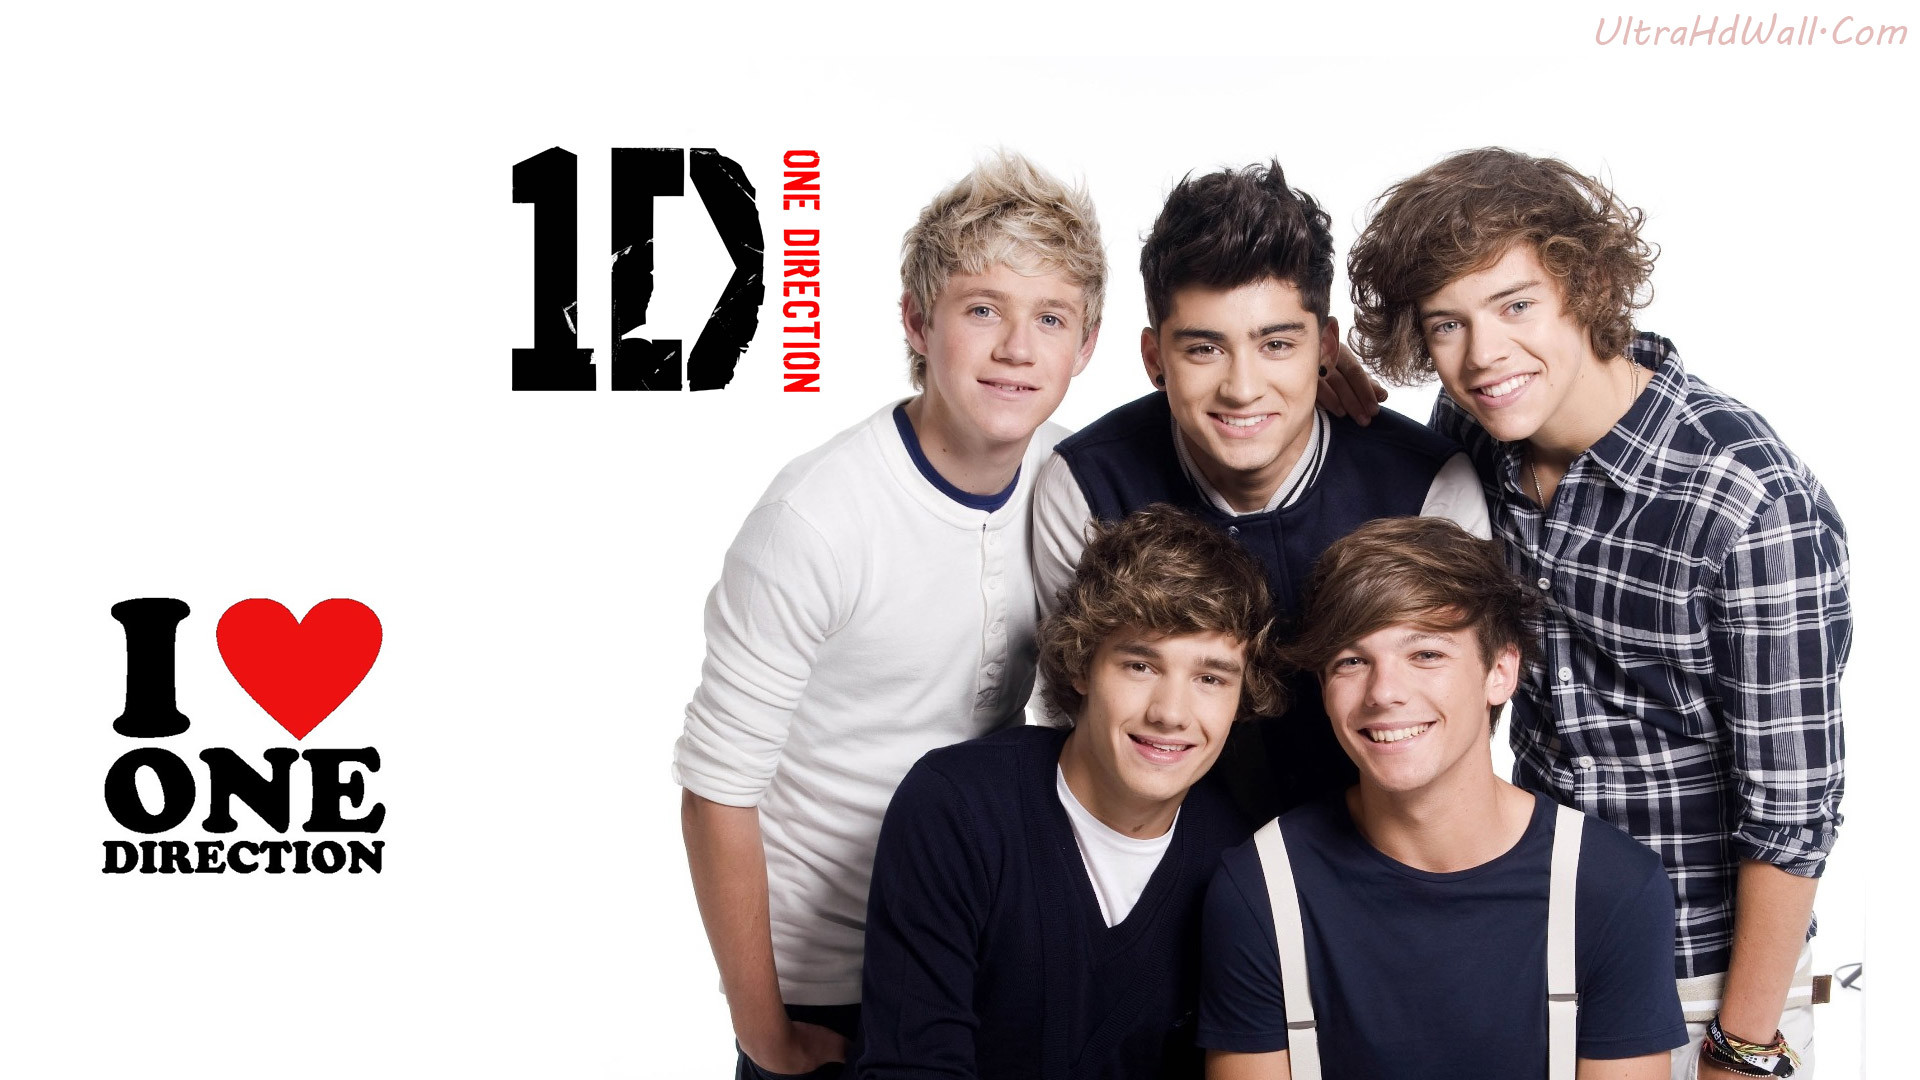 1D One Direction Wallpaper 16 18341 Images HD Wallpapers Wallfoycom